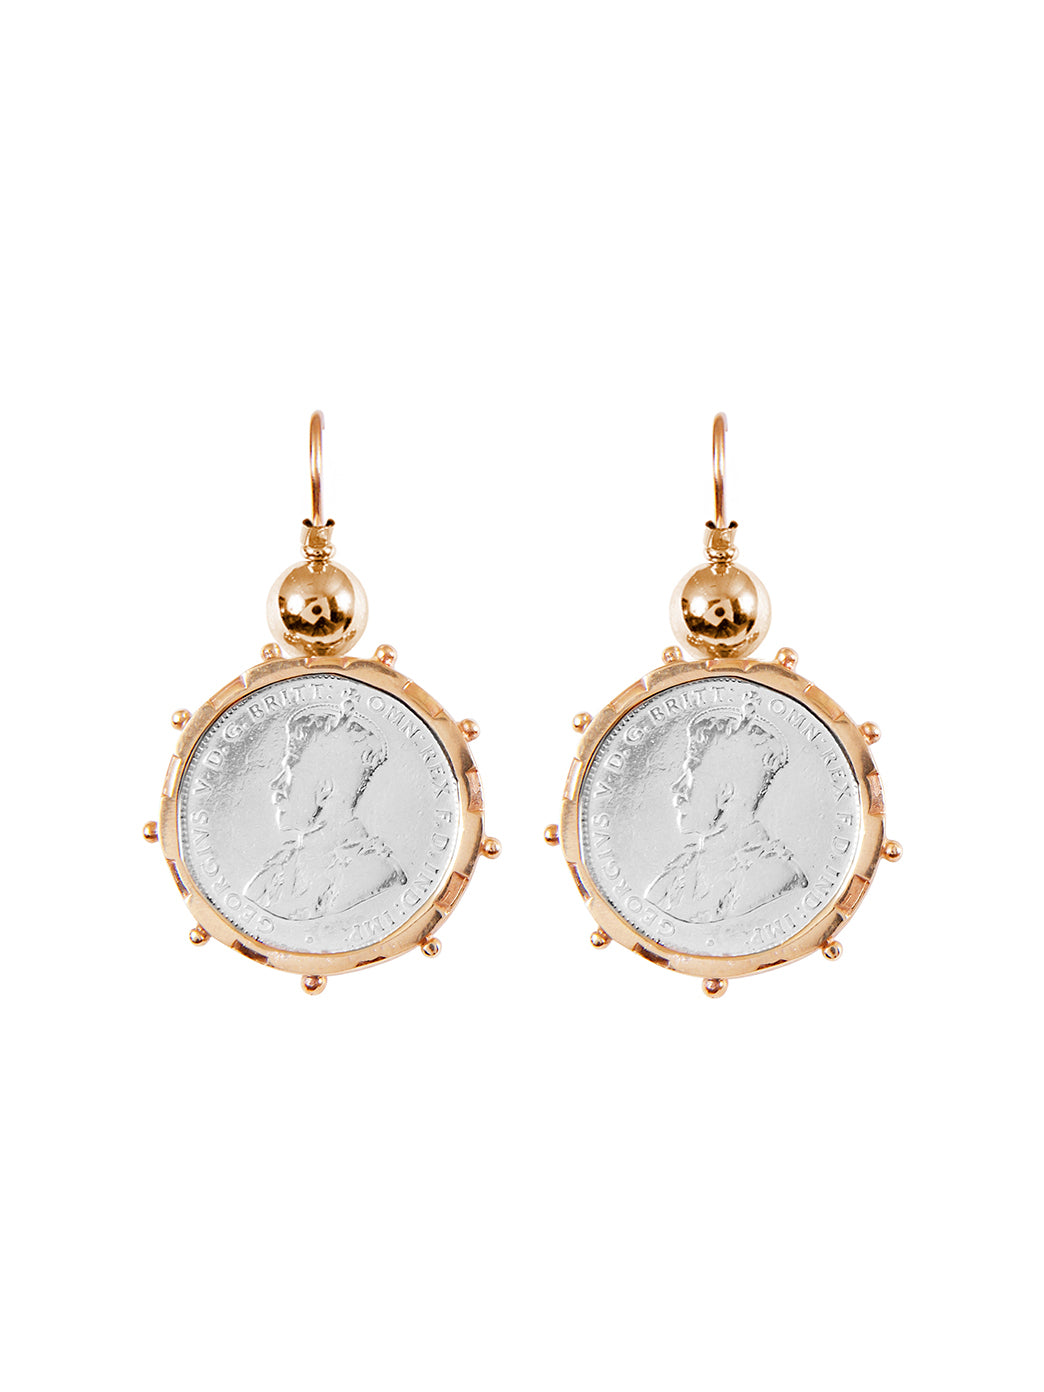 Fiorina Jewellery Gold Encased Shilling Coin Earrings Gold Highlights